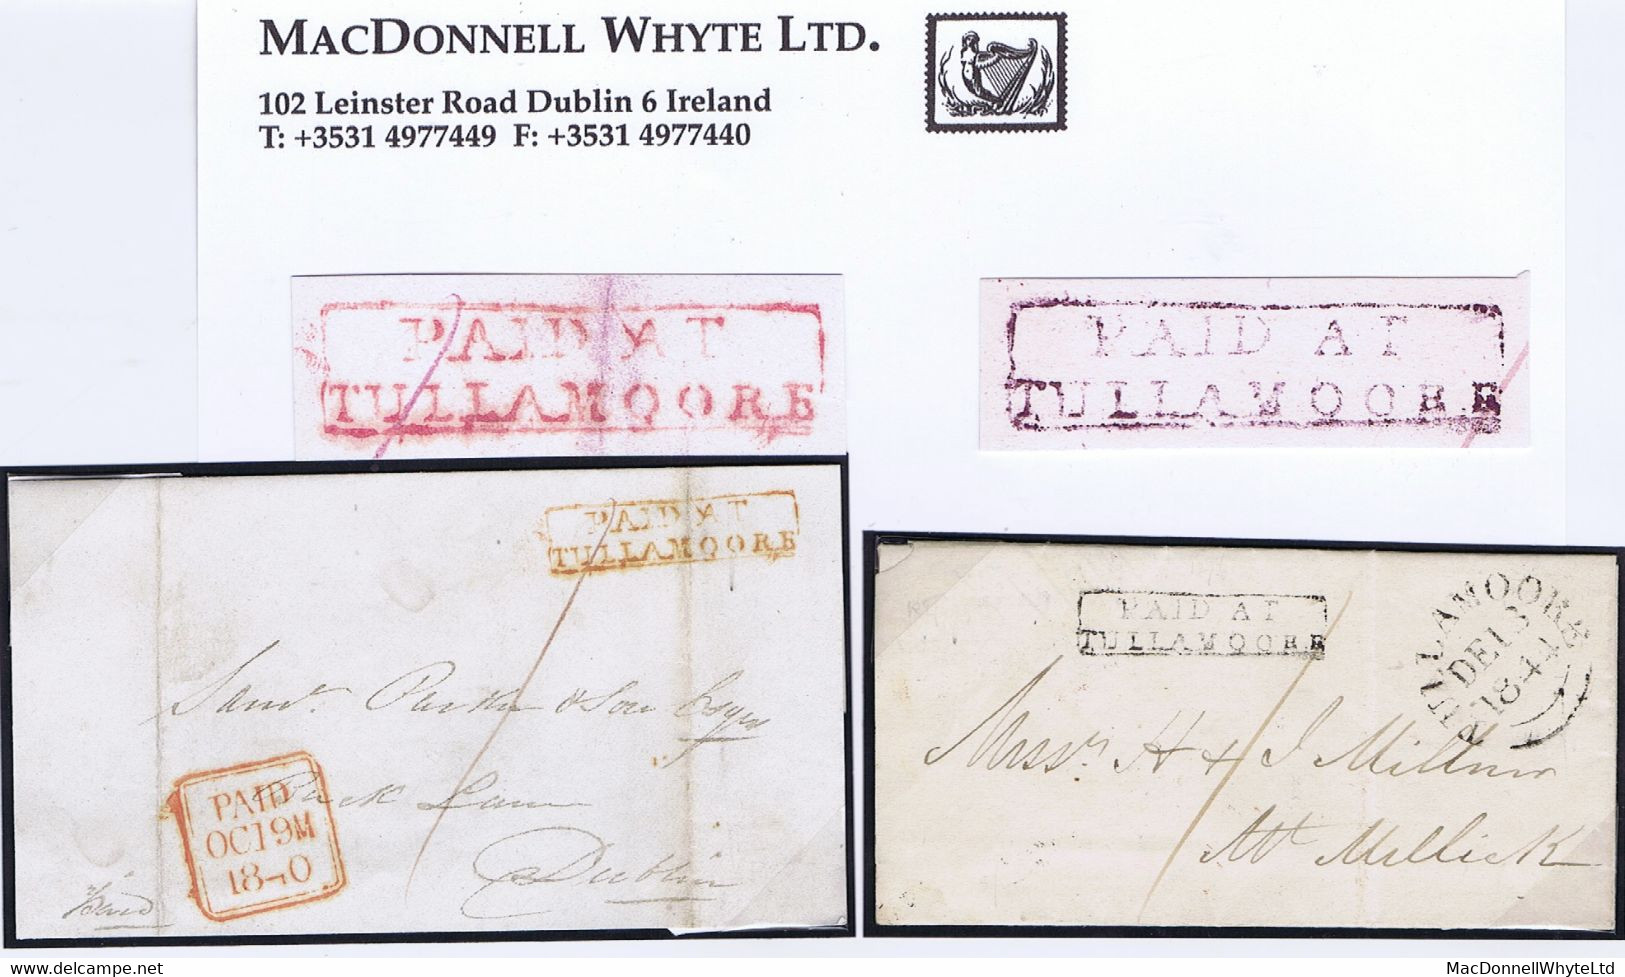 Ireland Offaly Uniform Penny Post Boxed PAID AT/TULLAMORE In Red 1840 And In Black 1844 On Front Or Cover - Préphilatélie